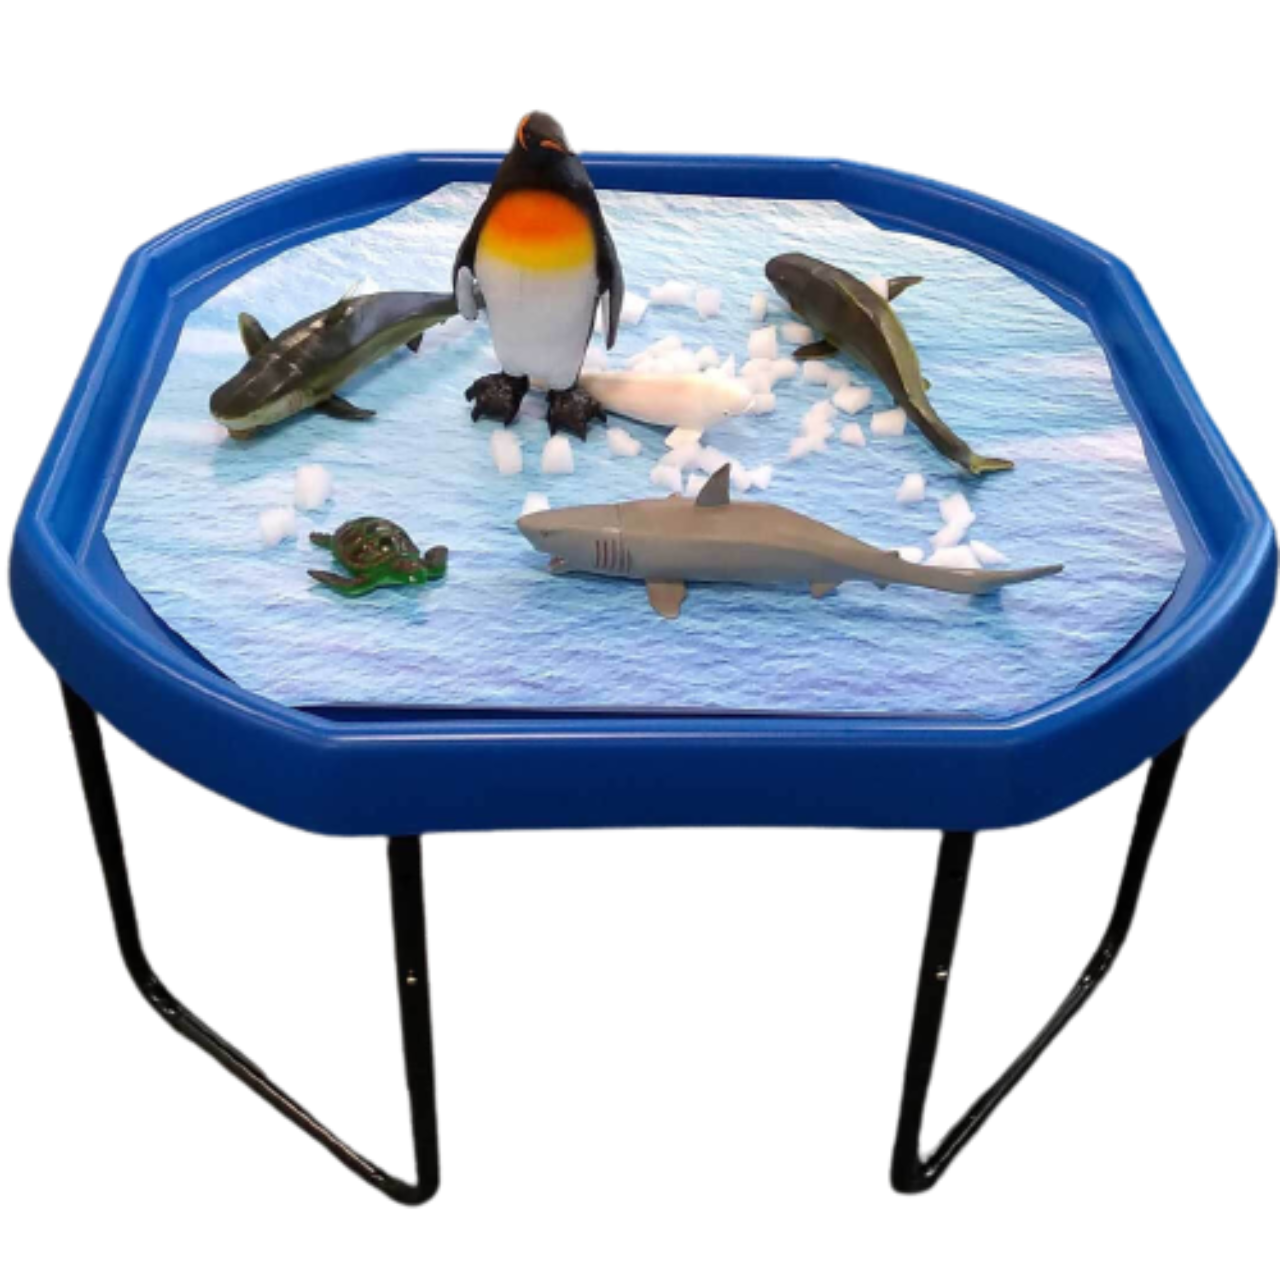 Blue Tuff Tray and Stand - Height Adjustable